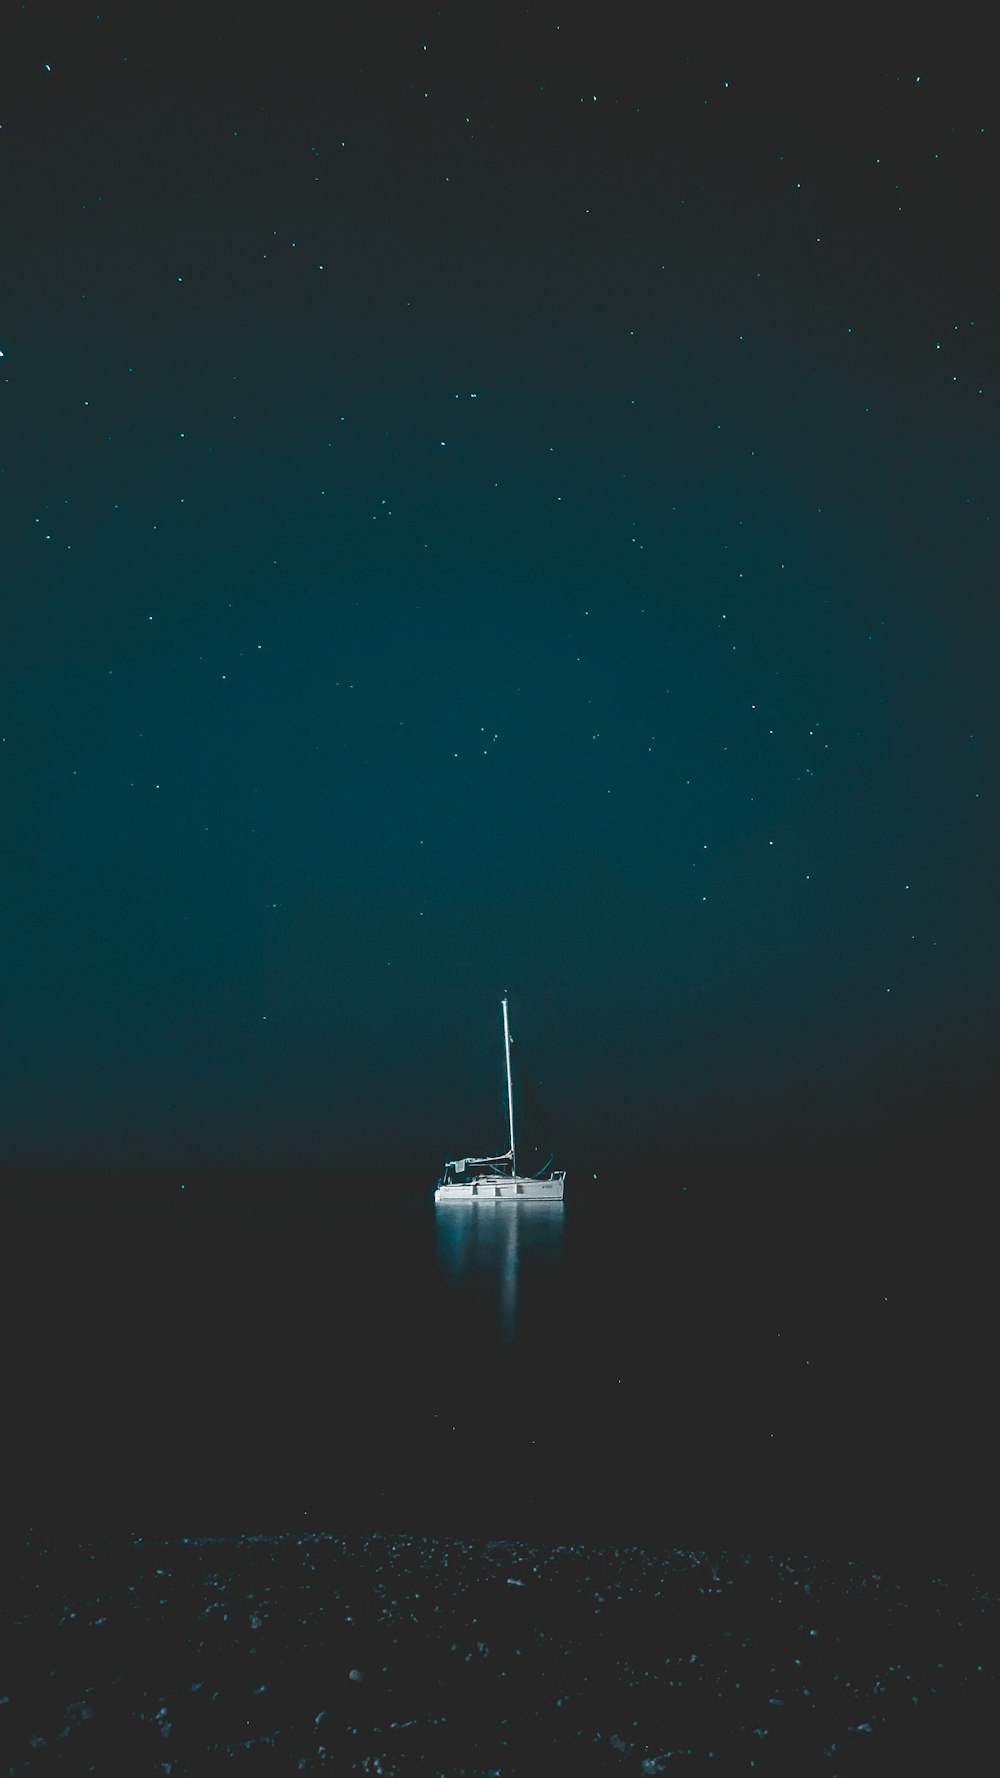 a boat in the water